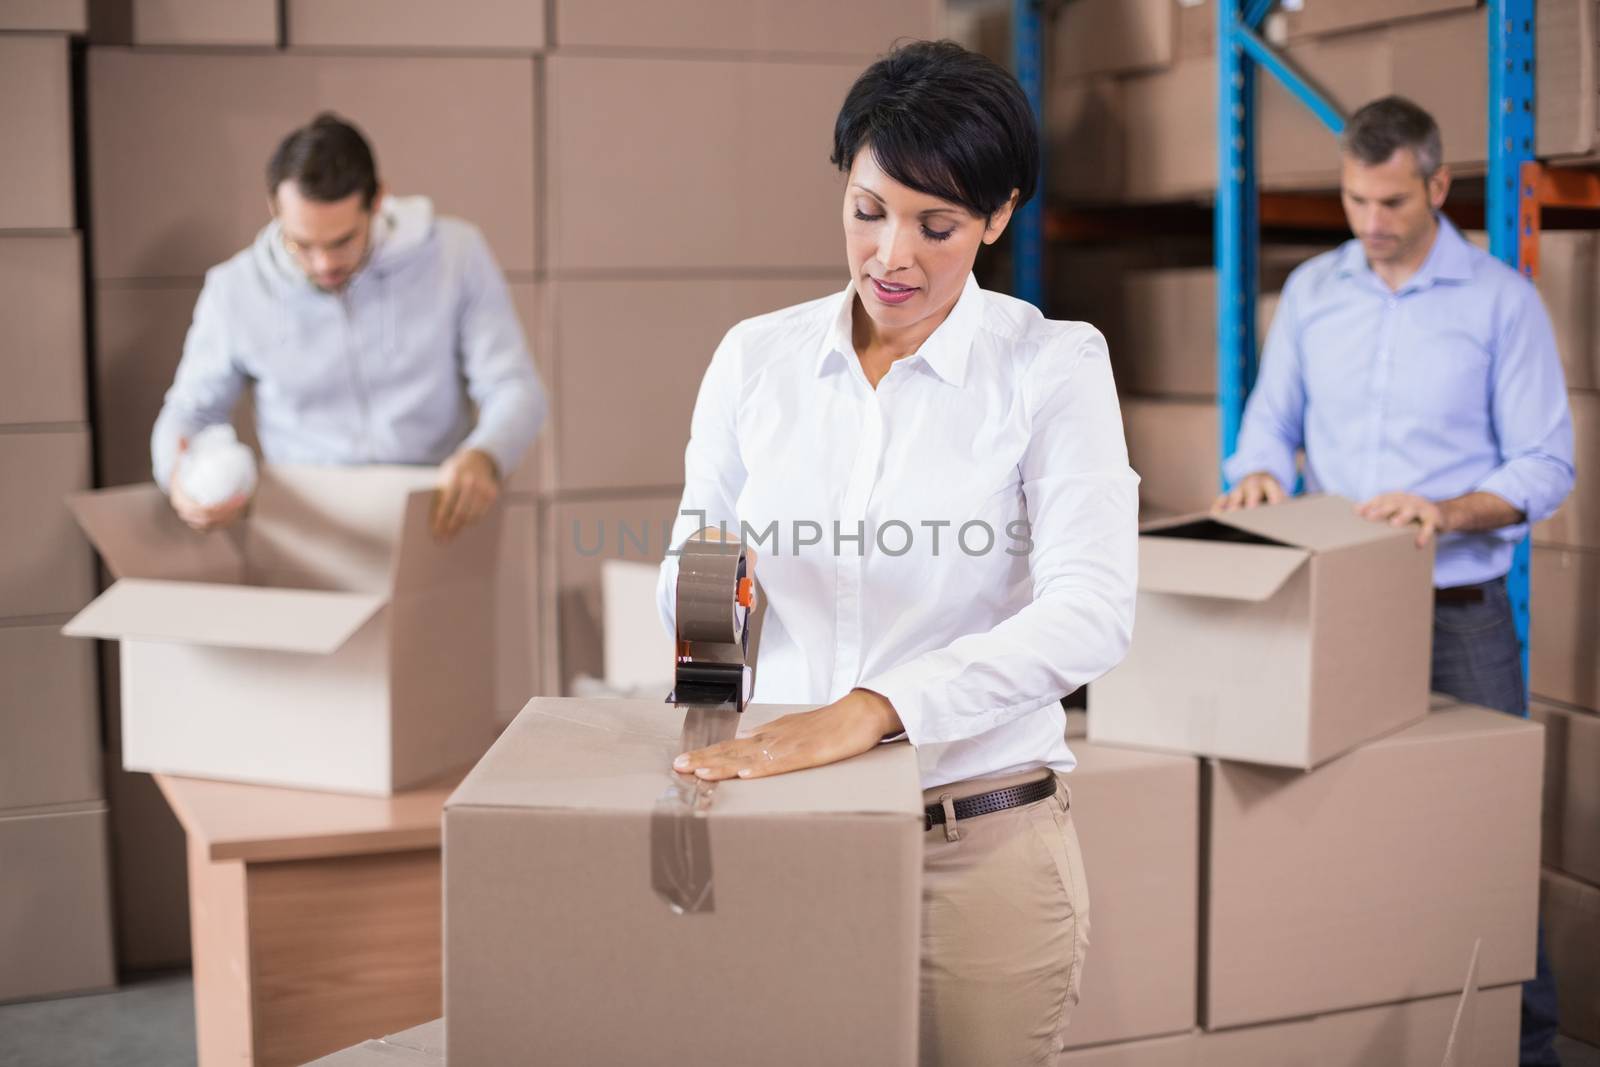 Warehouse workers packing up boxes by Wavebreakmedia